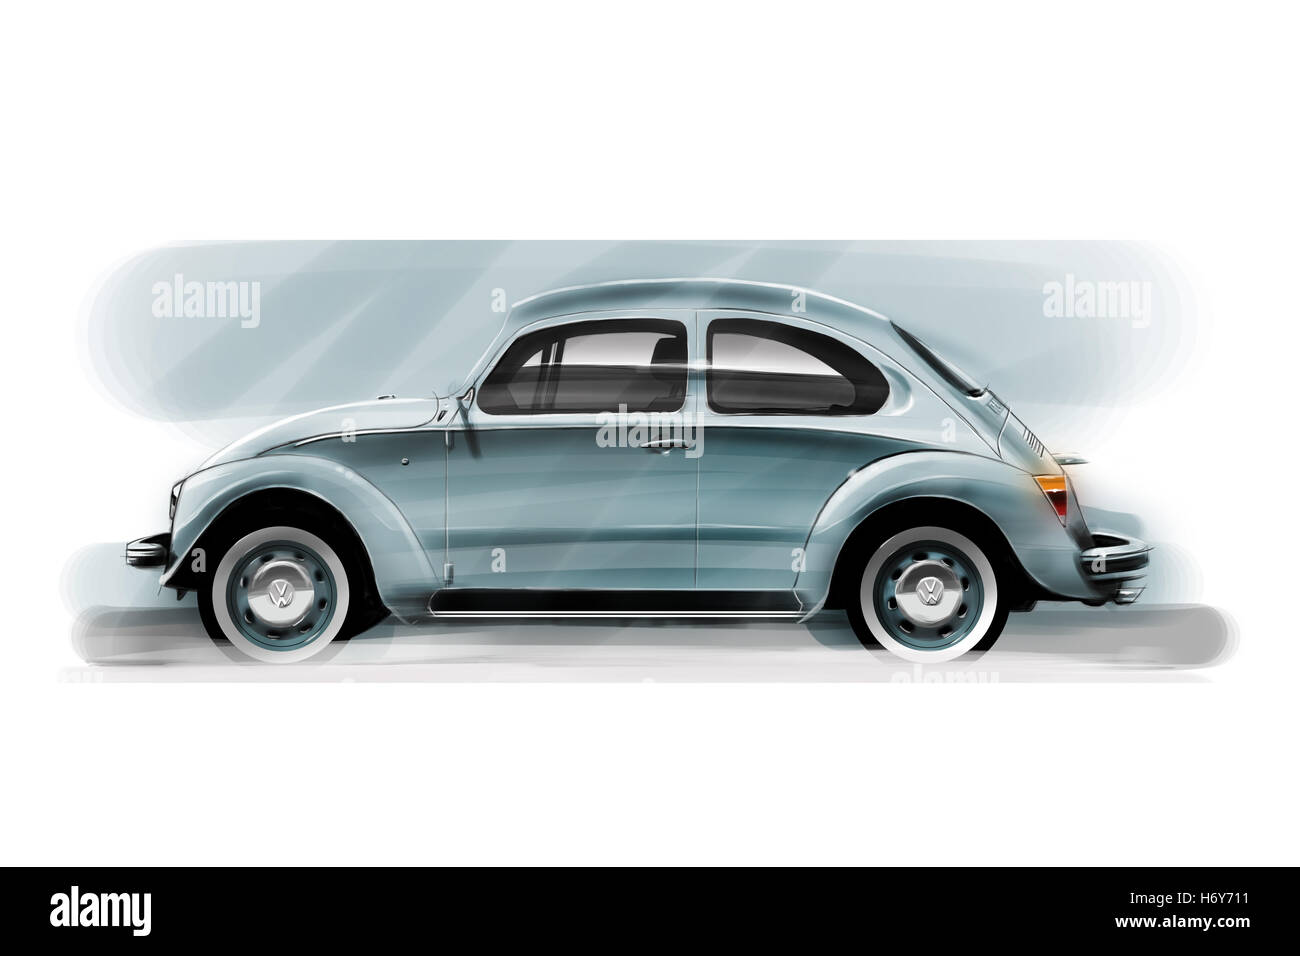 Volkswagen Beetle car drawing by Adrian Dewey, author of How to Illustrate and Desin concept cars Stock Photo